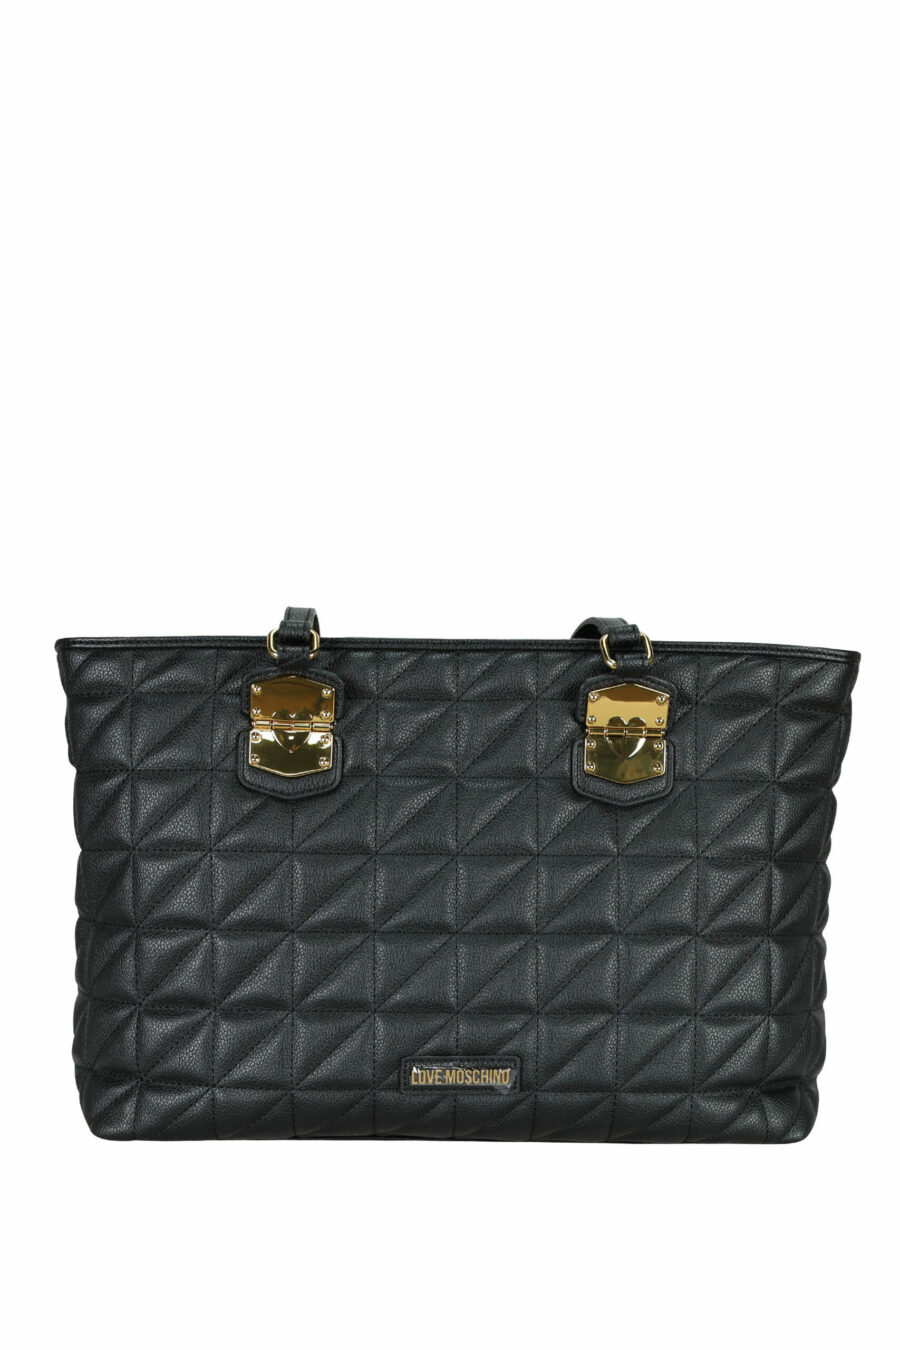 Black quilted shopper bag with gold lettering minilogue - 8050537994992 scaled